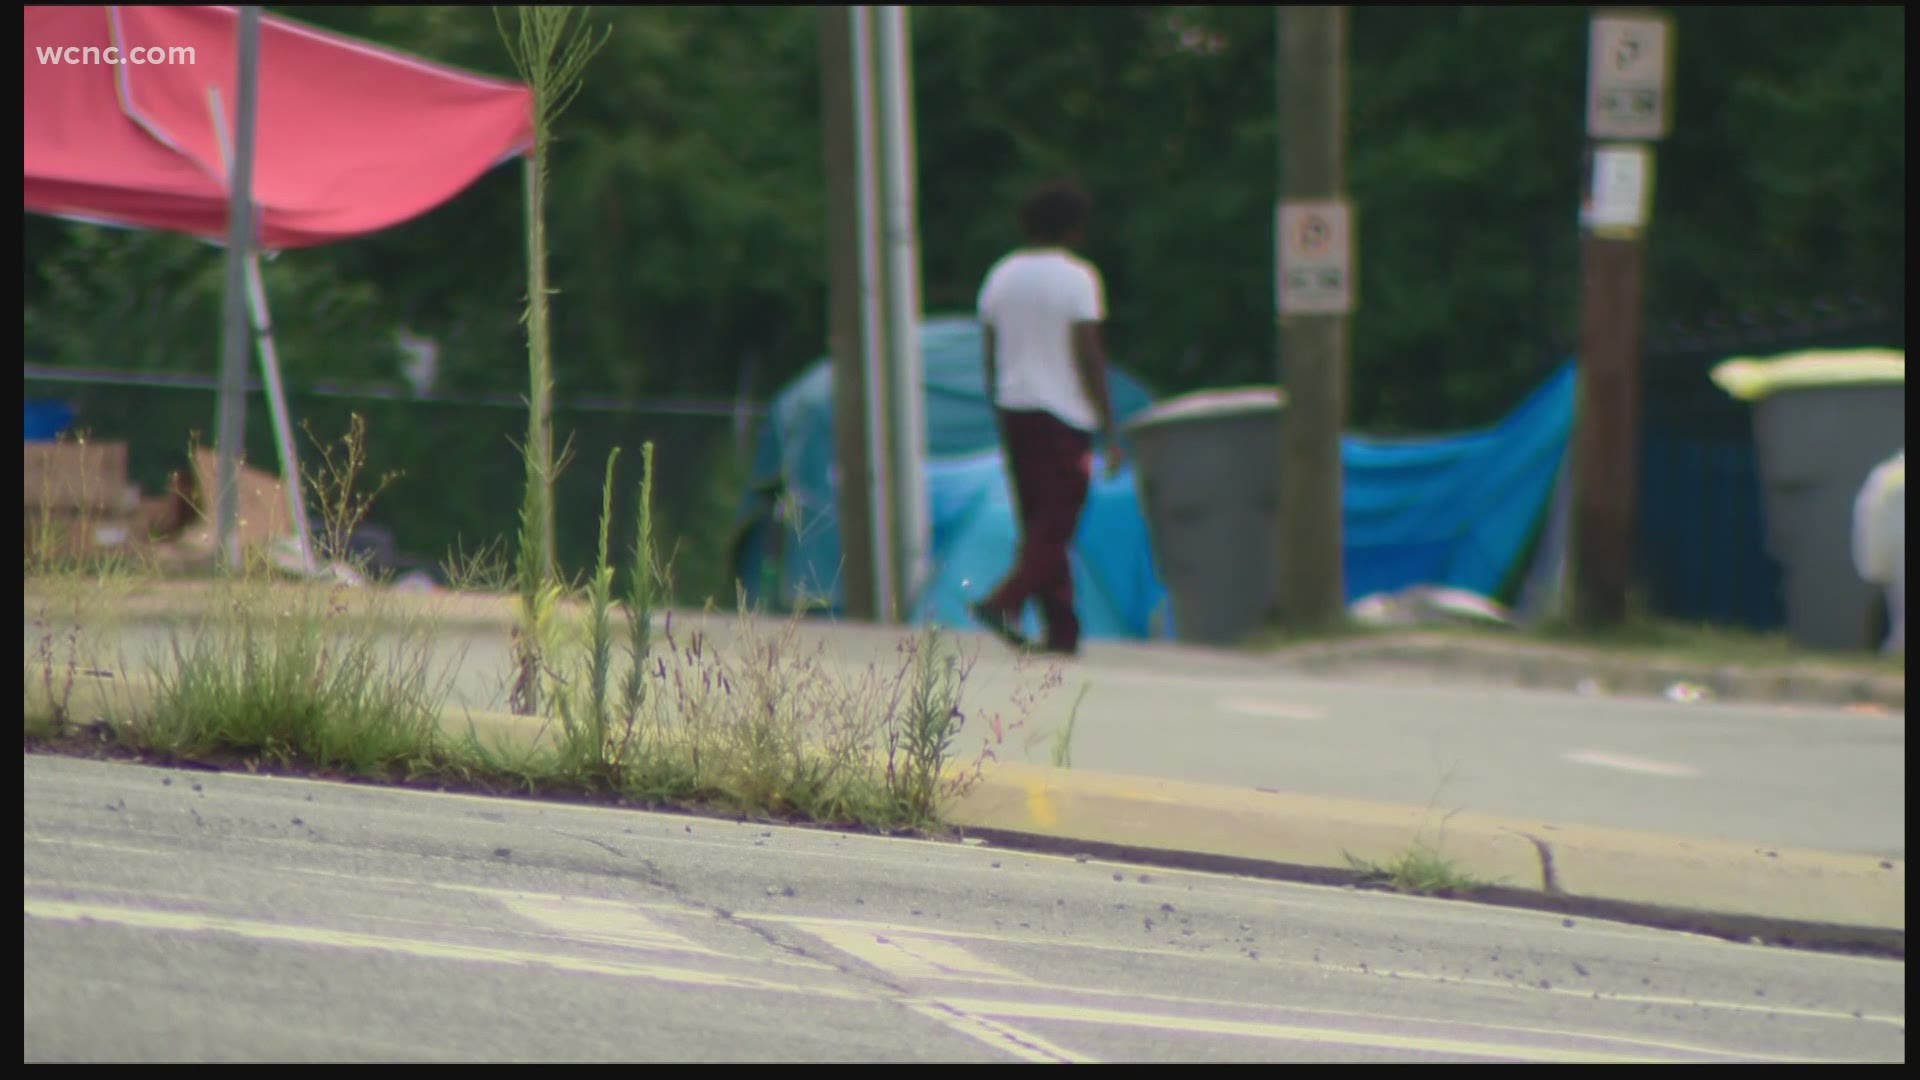 The nonprofit Humble Angles is looking for volunteers to help give back to those living in Charlotte’s Tent City.